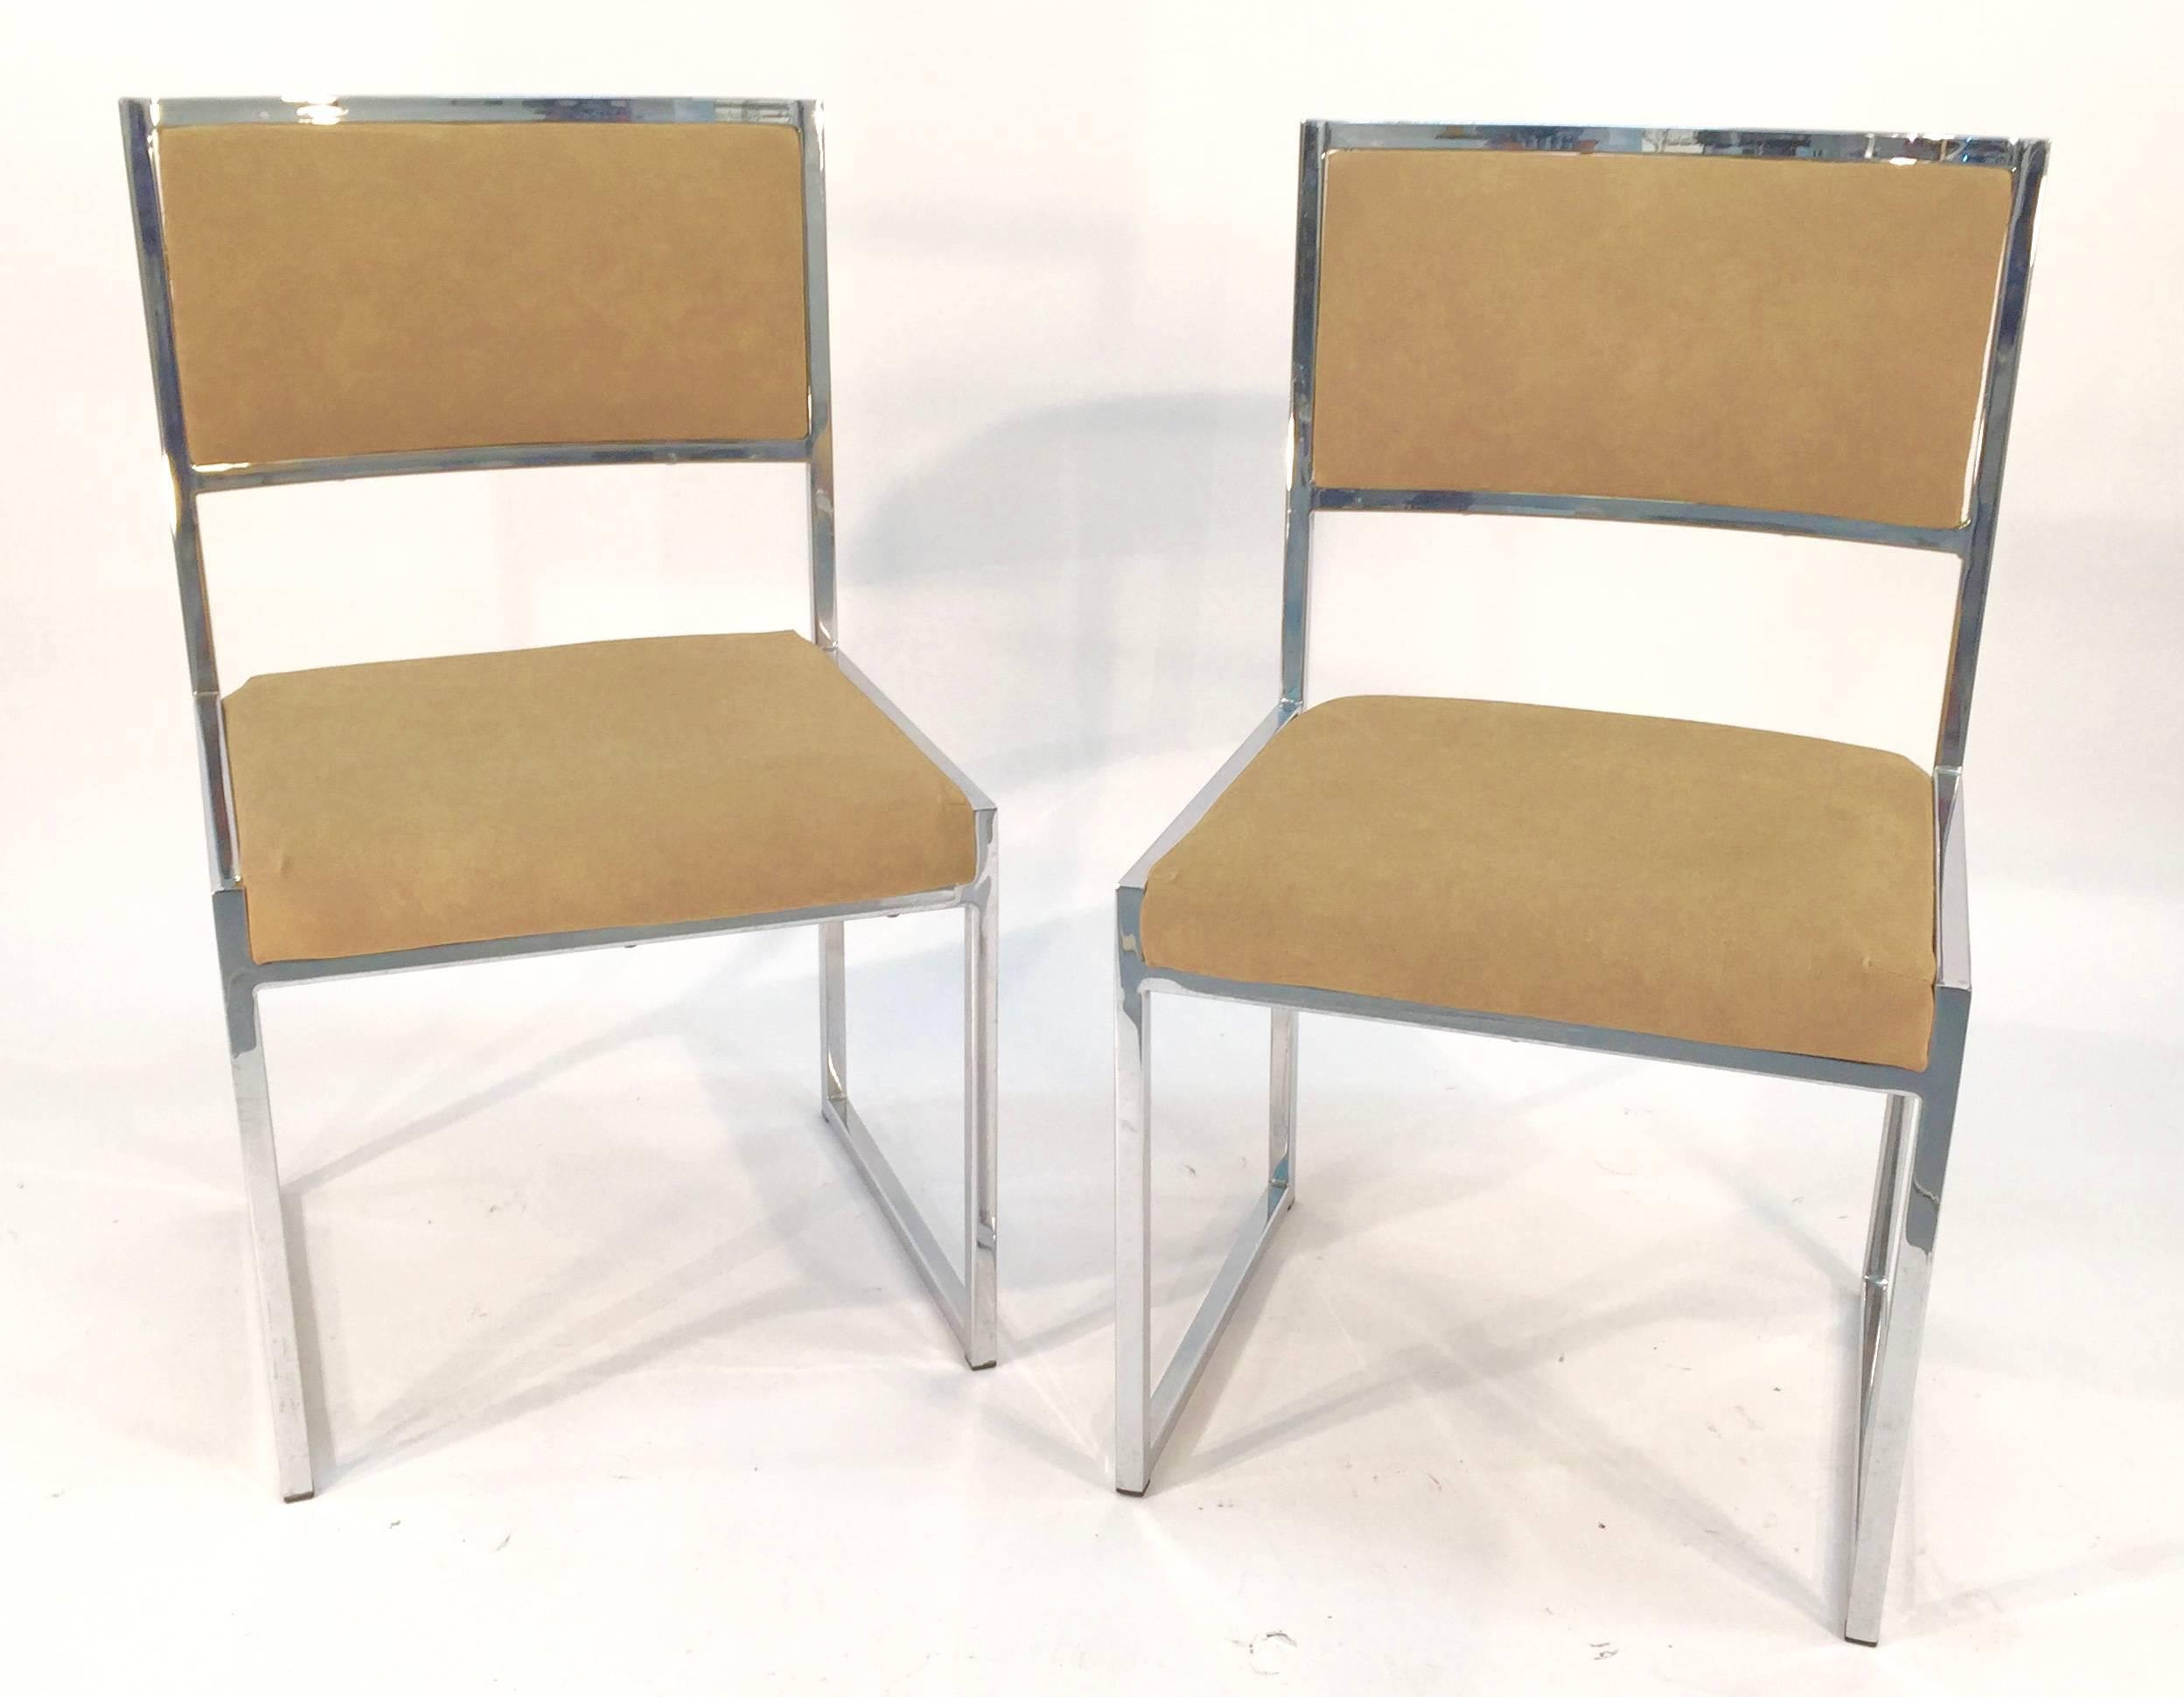 Willy Rizzo pair of chrome side or dining chairs, Italy, 1970s.